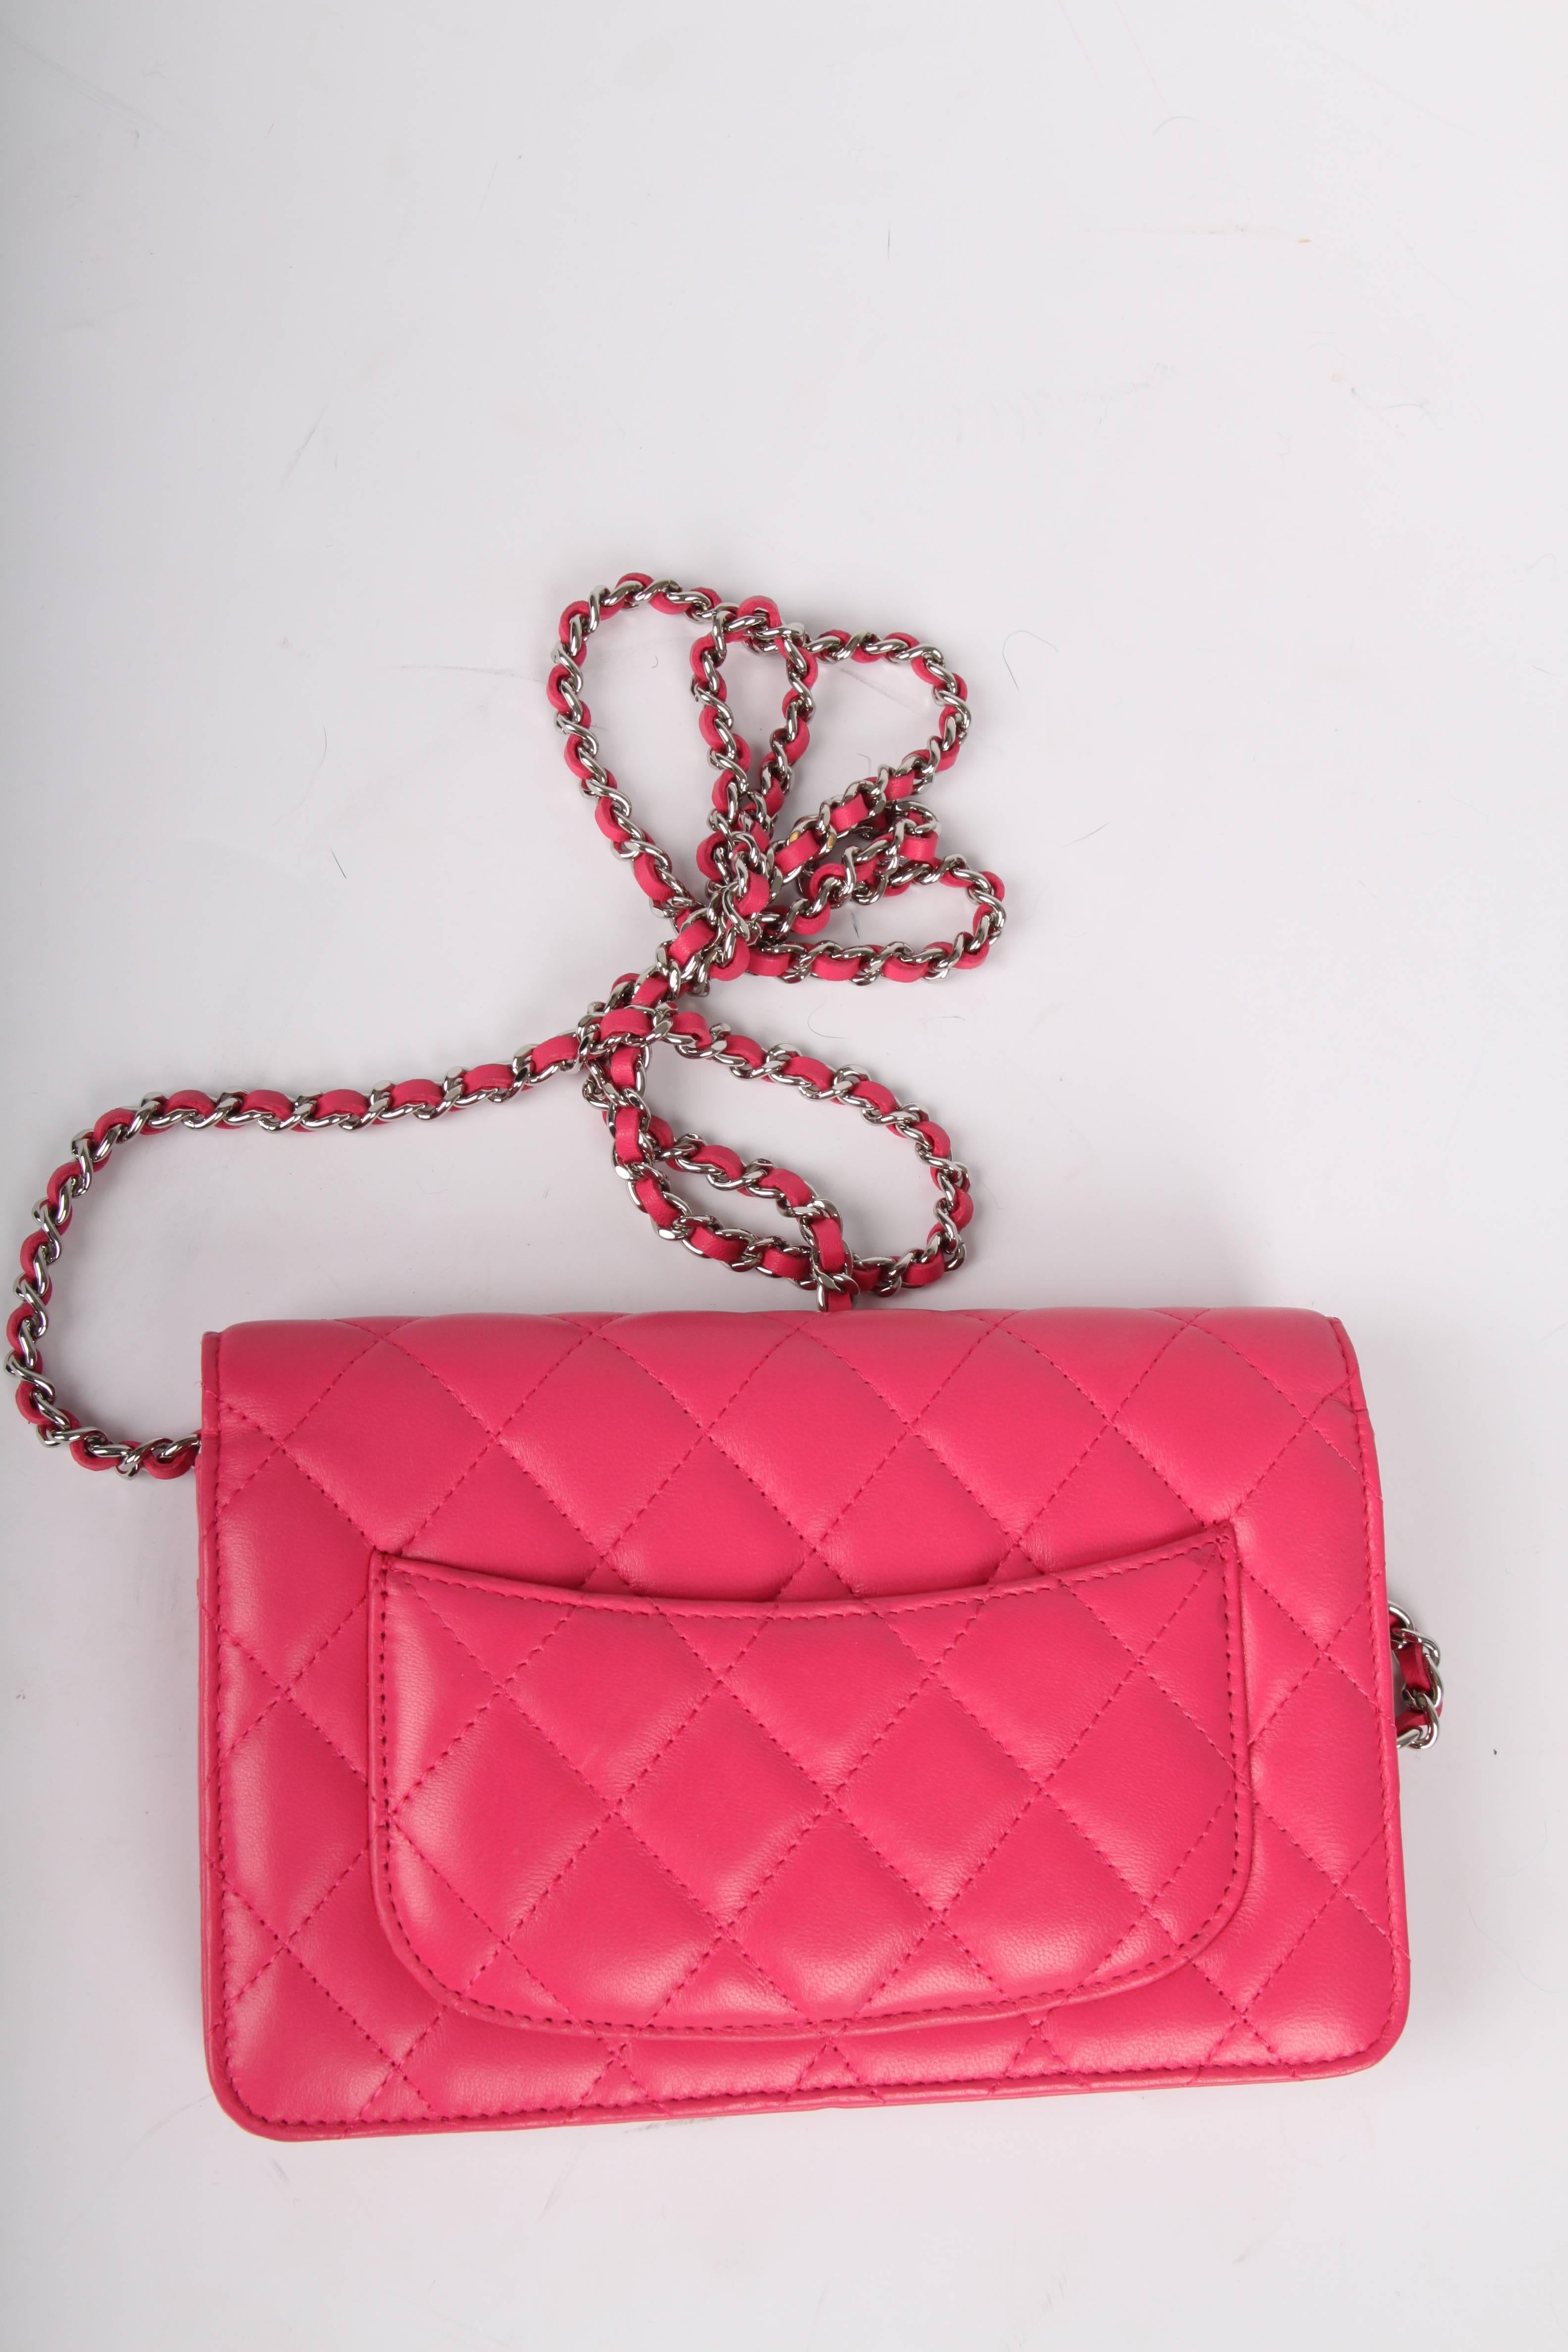 Highly desirable Chanel bag; it is the Wallet on Chain! Wearable on the shoulder and also cross body, of course.

Pink quilted lambskin leather and silver hardware, a small silver-tone metal interlocking CC logo on the flap. The chain has pink